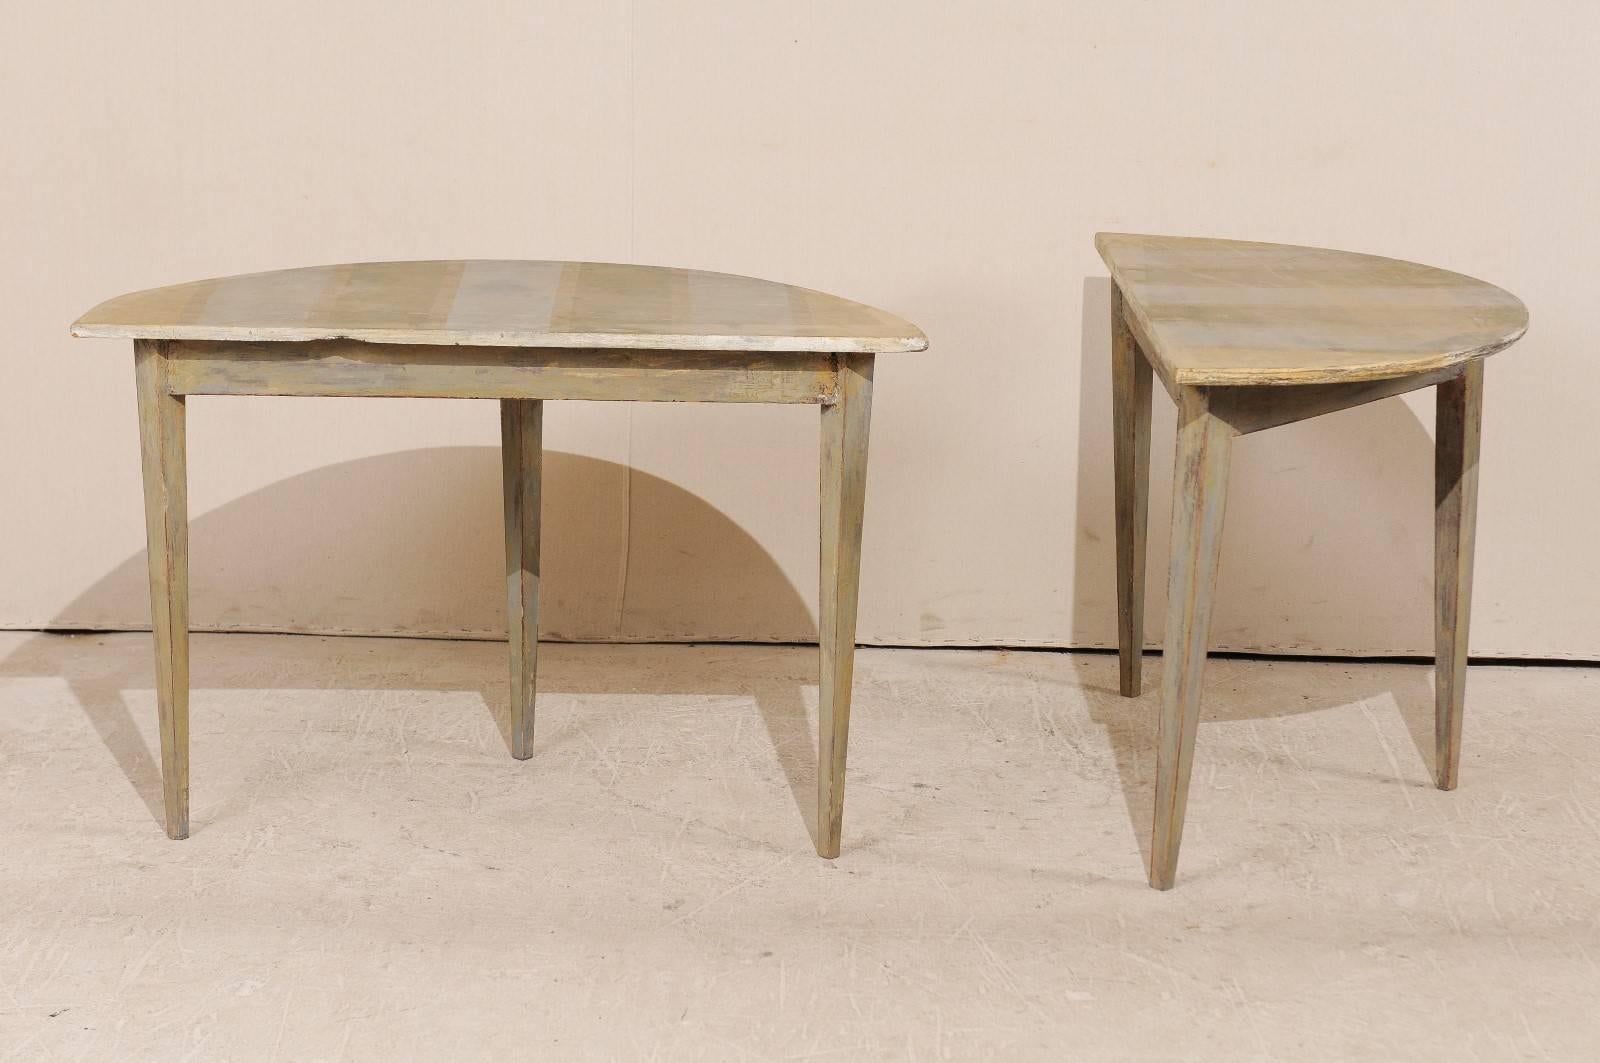 Pair of 19th Century Swedish Painted Wood Demi-Lune Tables with Unique Stripes 2